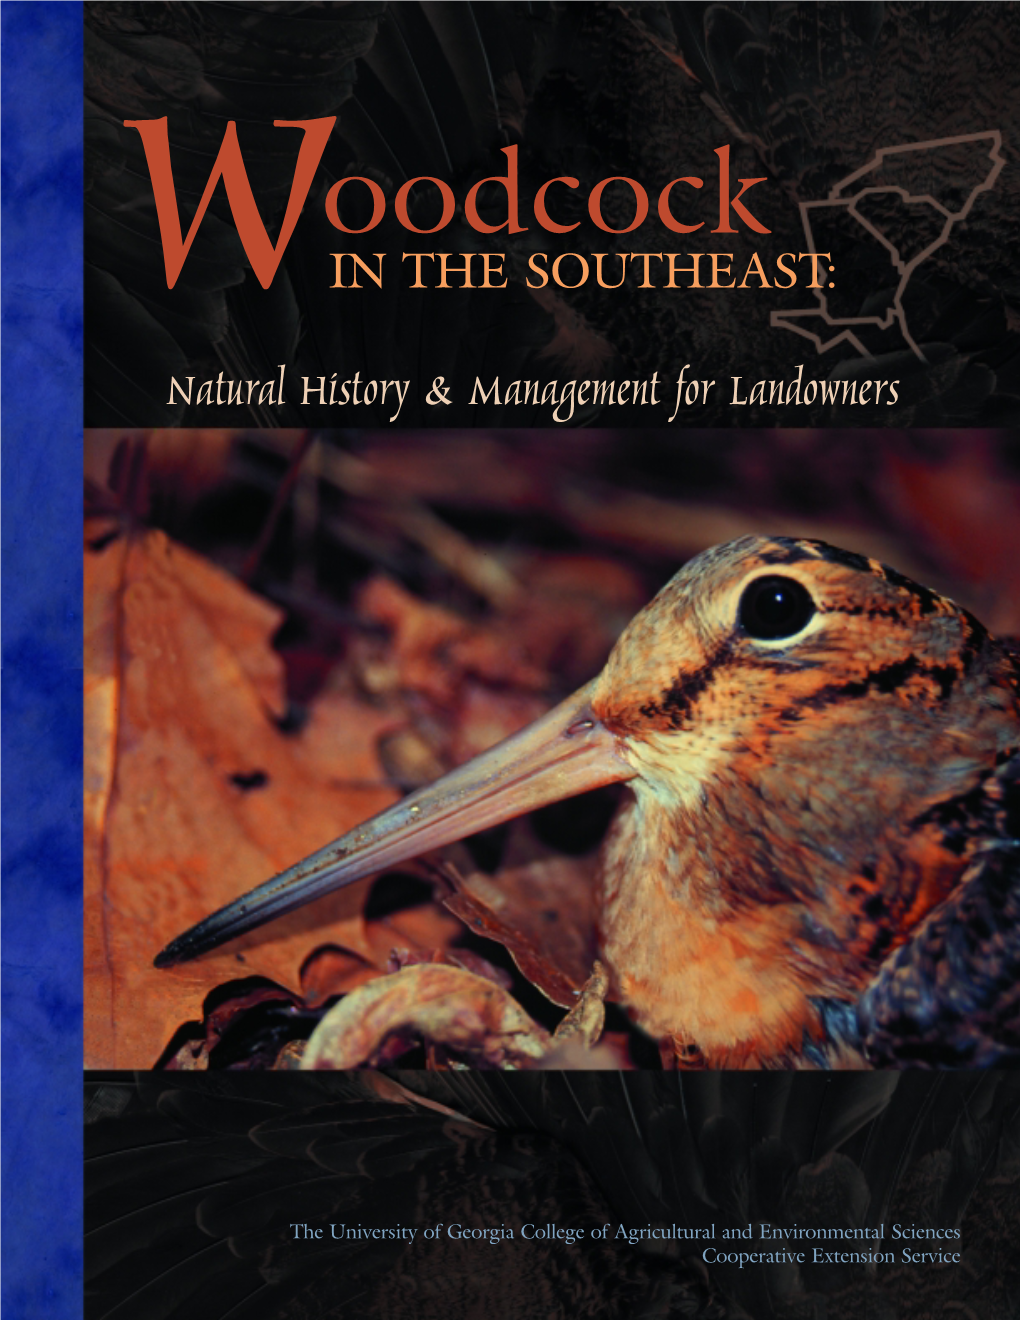 Woodcock in the Southeast (Pdf)